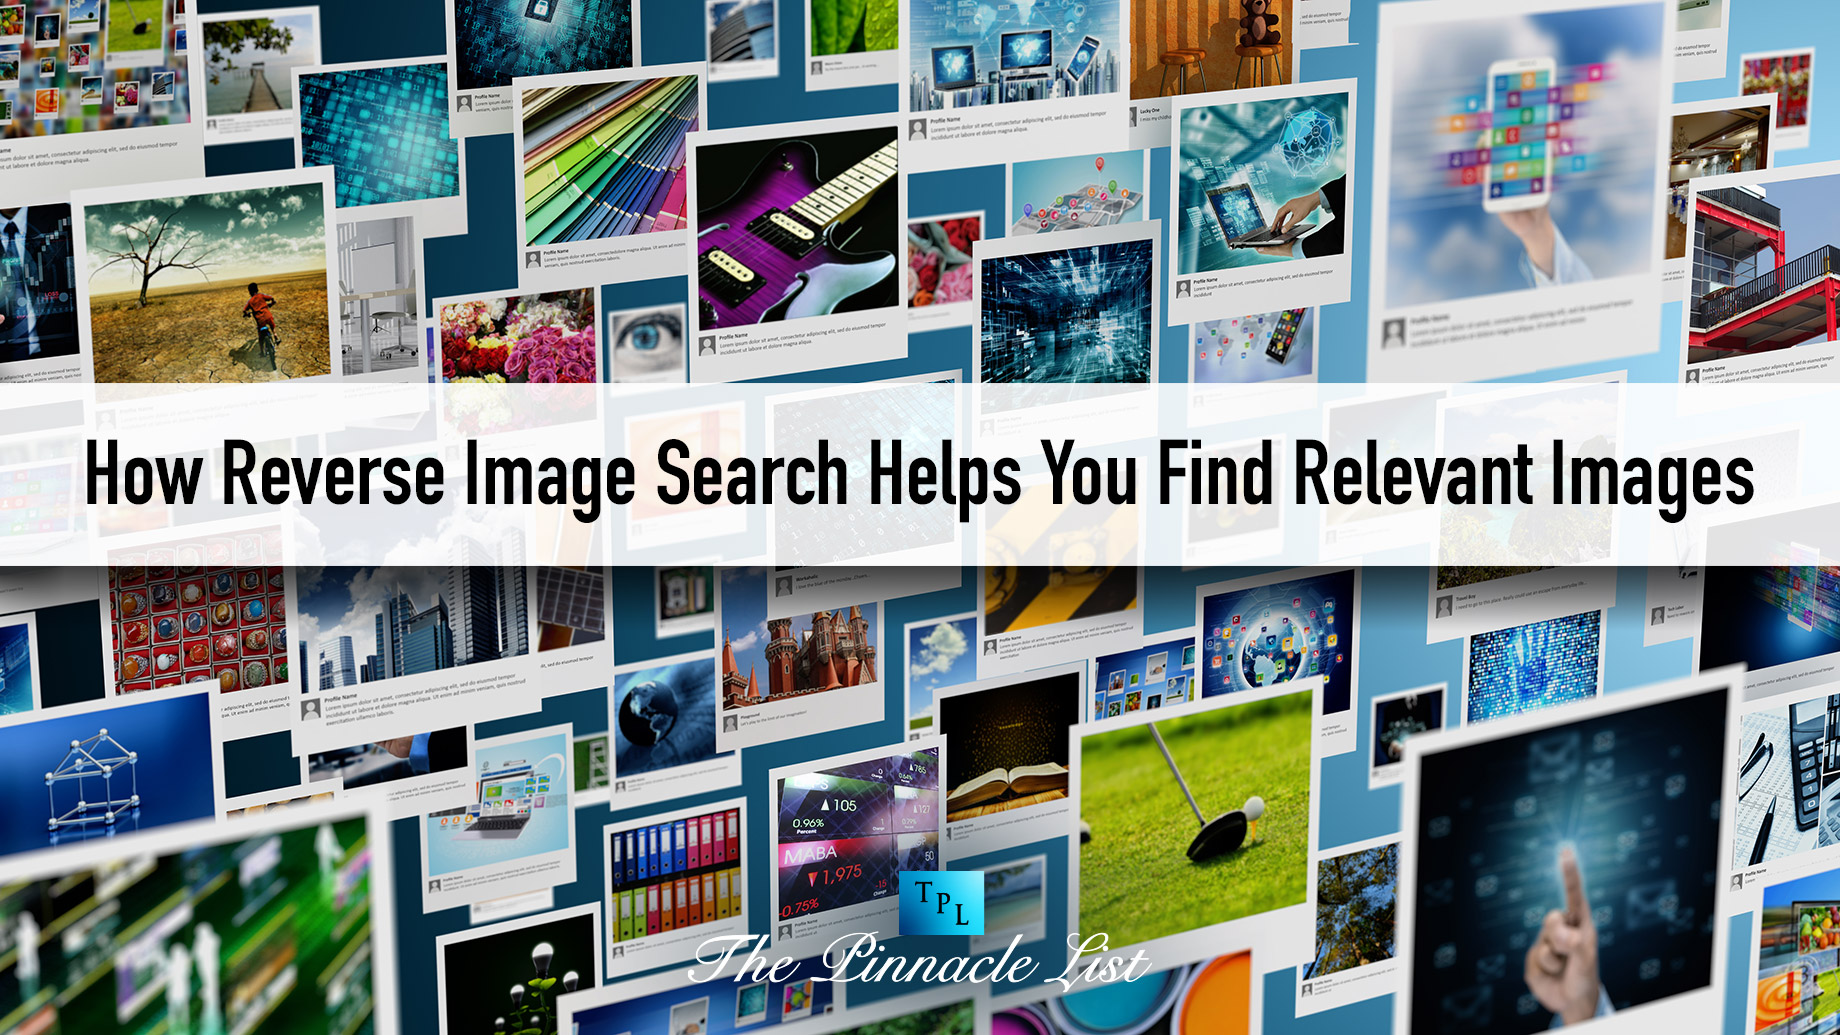 How Reverse Image Search Helps You Find Relevant Images